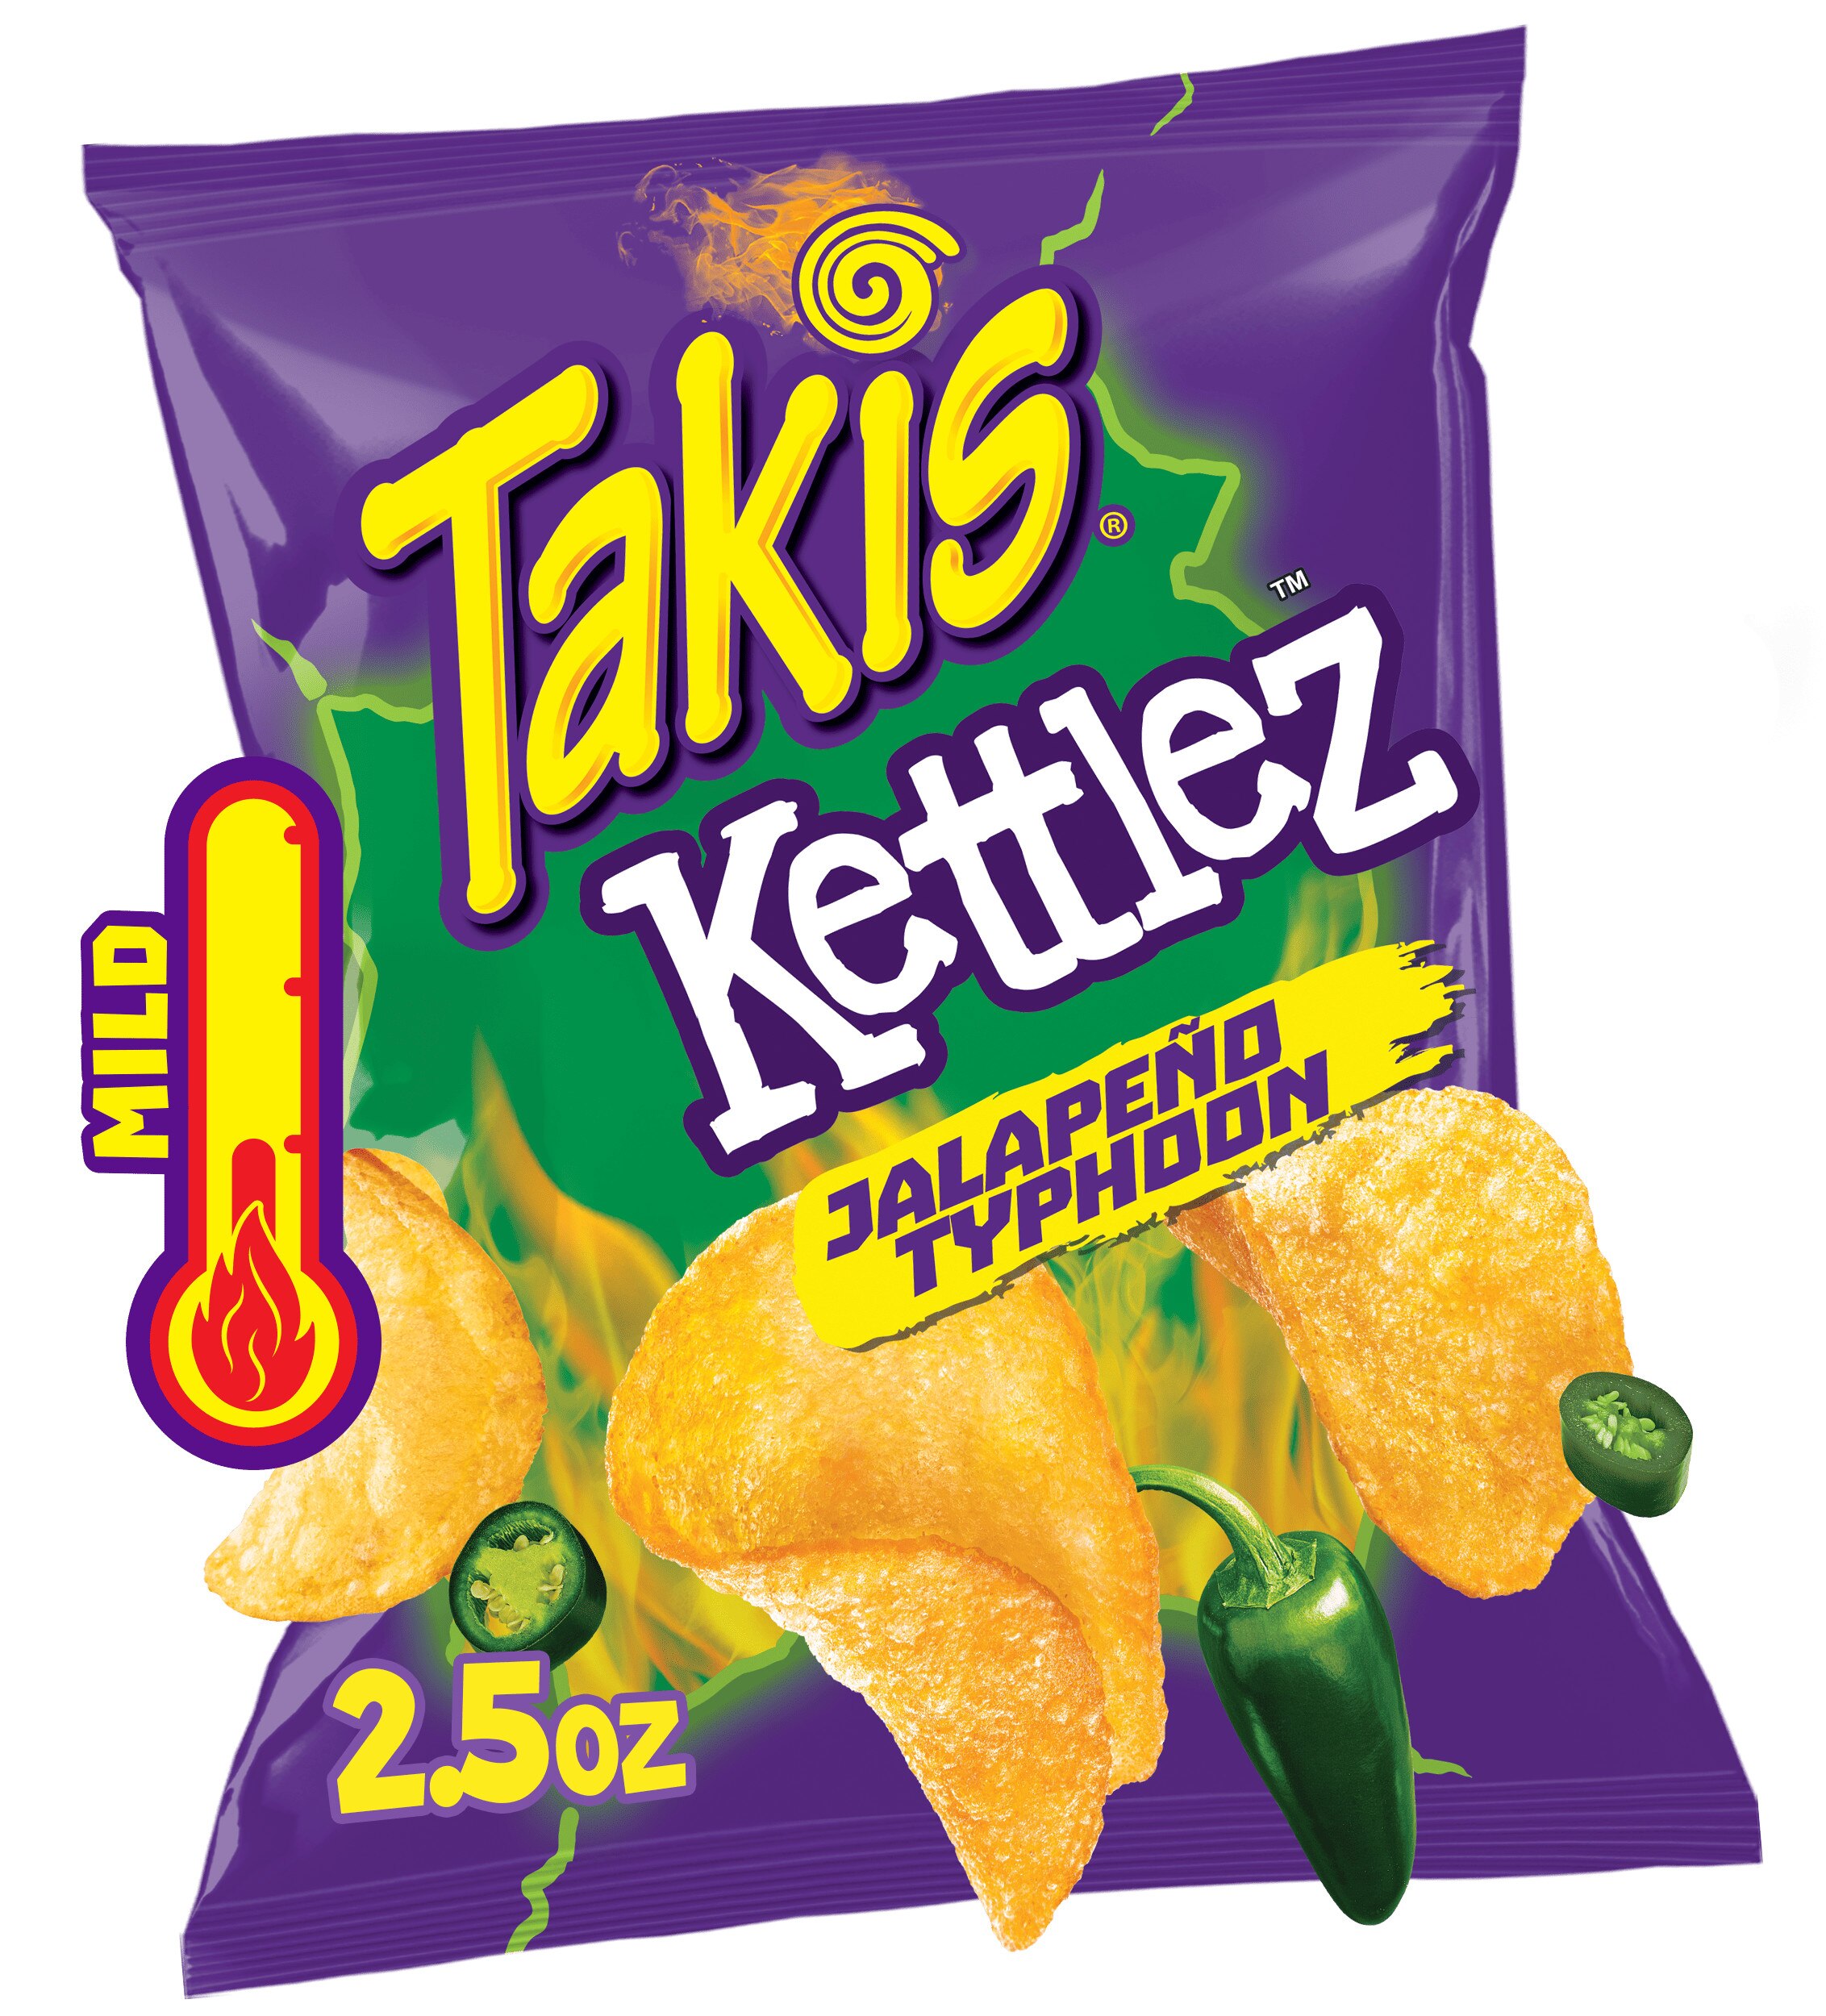 Takis Jalapeno Typhoon Kettlez Jalapeno Flavored Spicy Kettle-Cooked Potato Chips, 2.5 oz